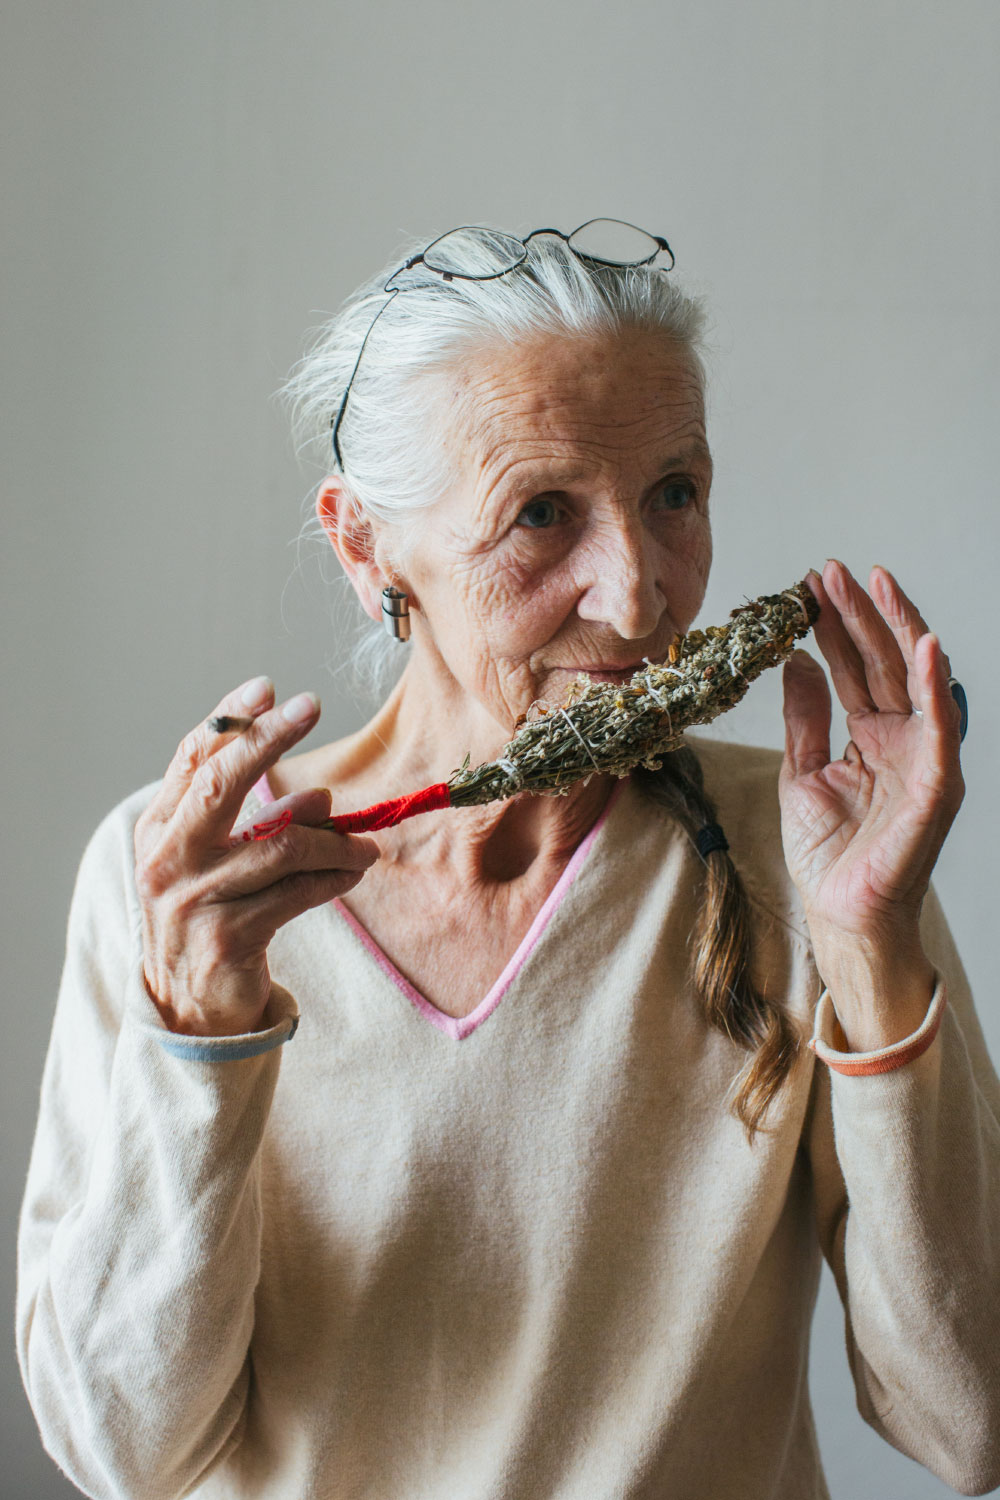 Indoor Portrait Of Senior Smoking Woman With Grey Hair Smelling Self-Made Smudge Stick